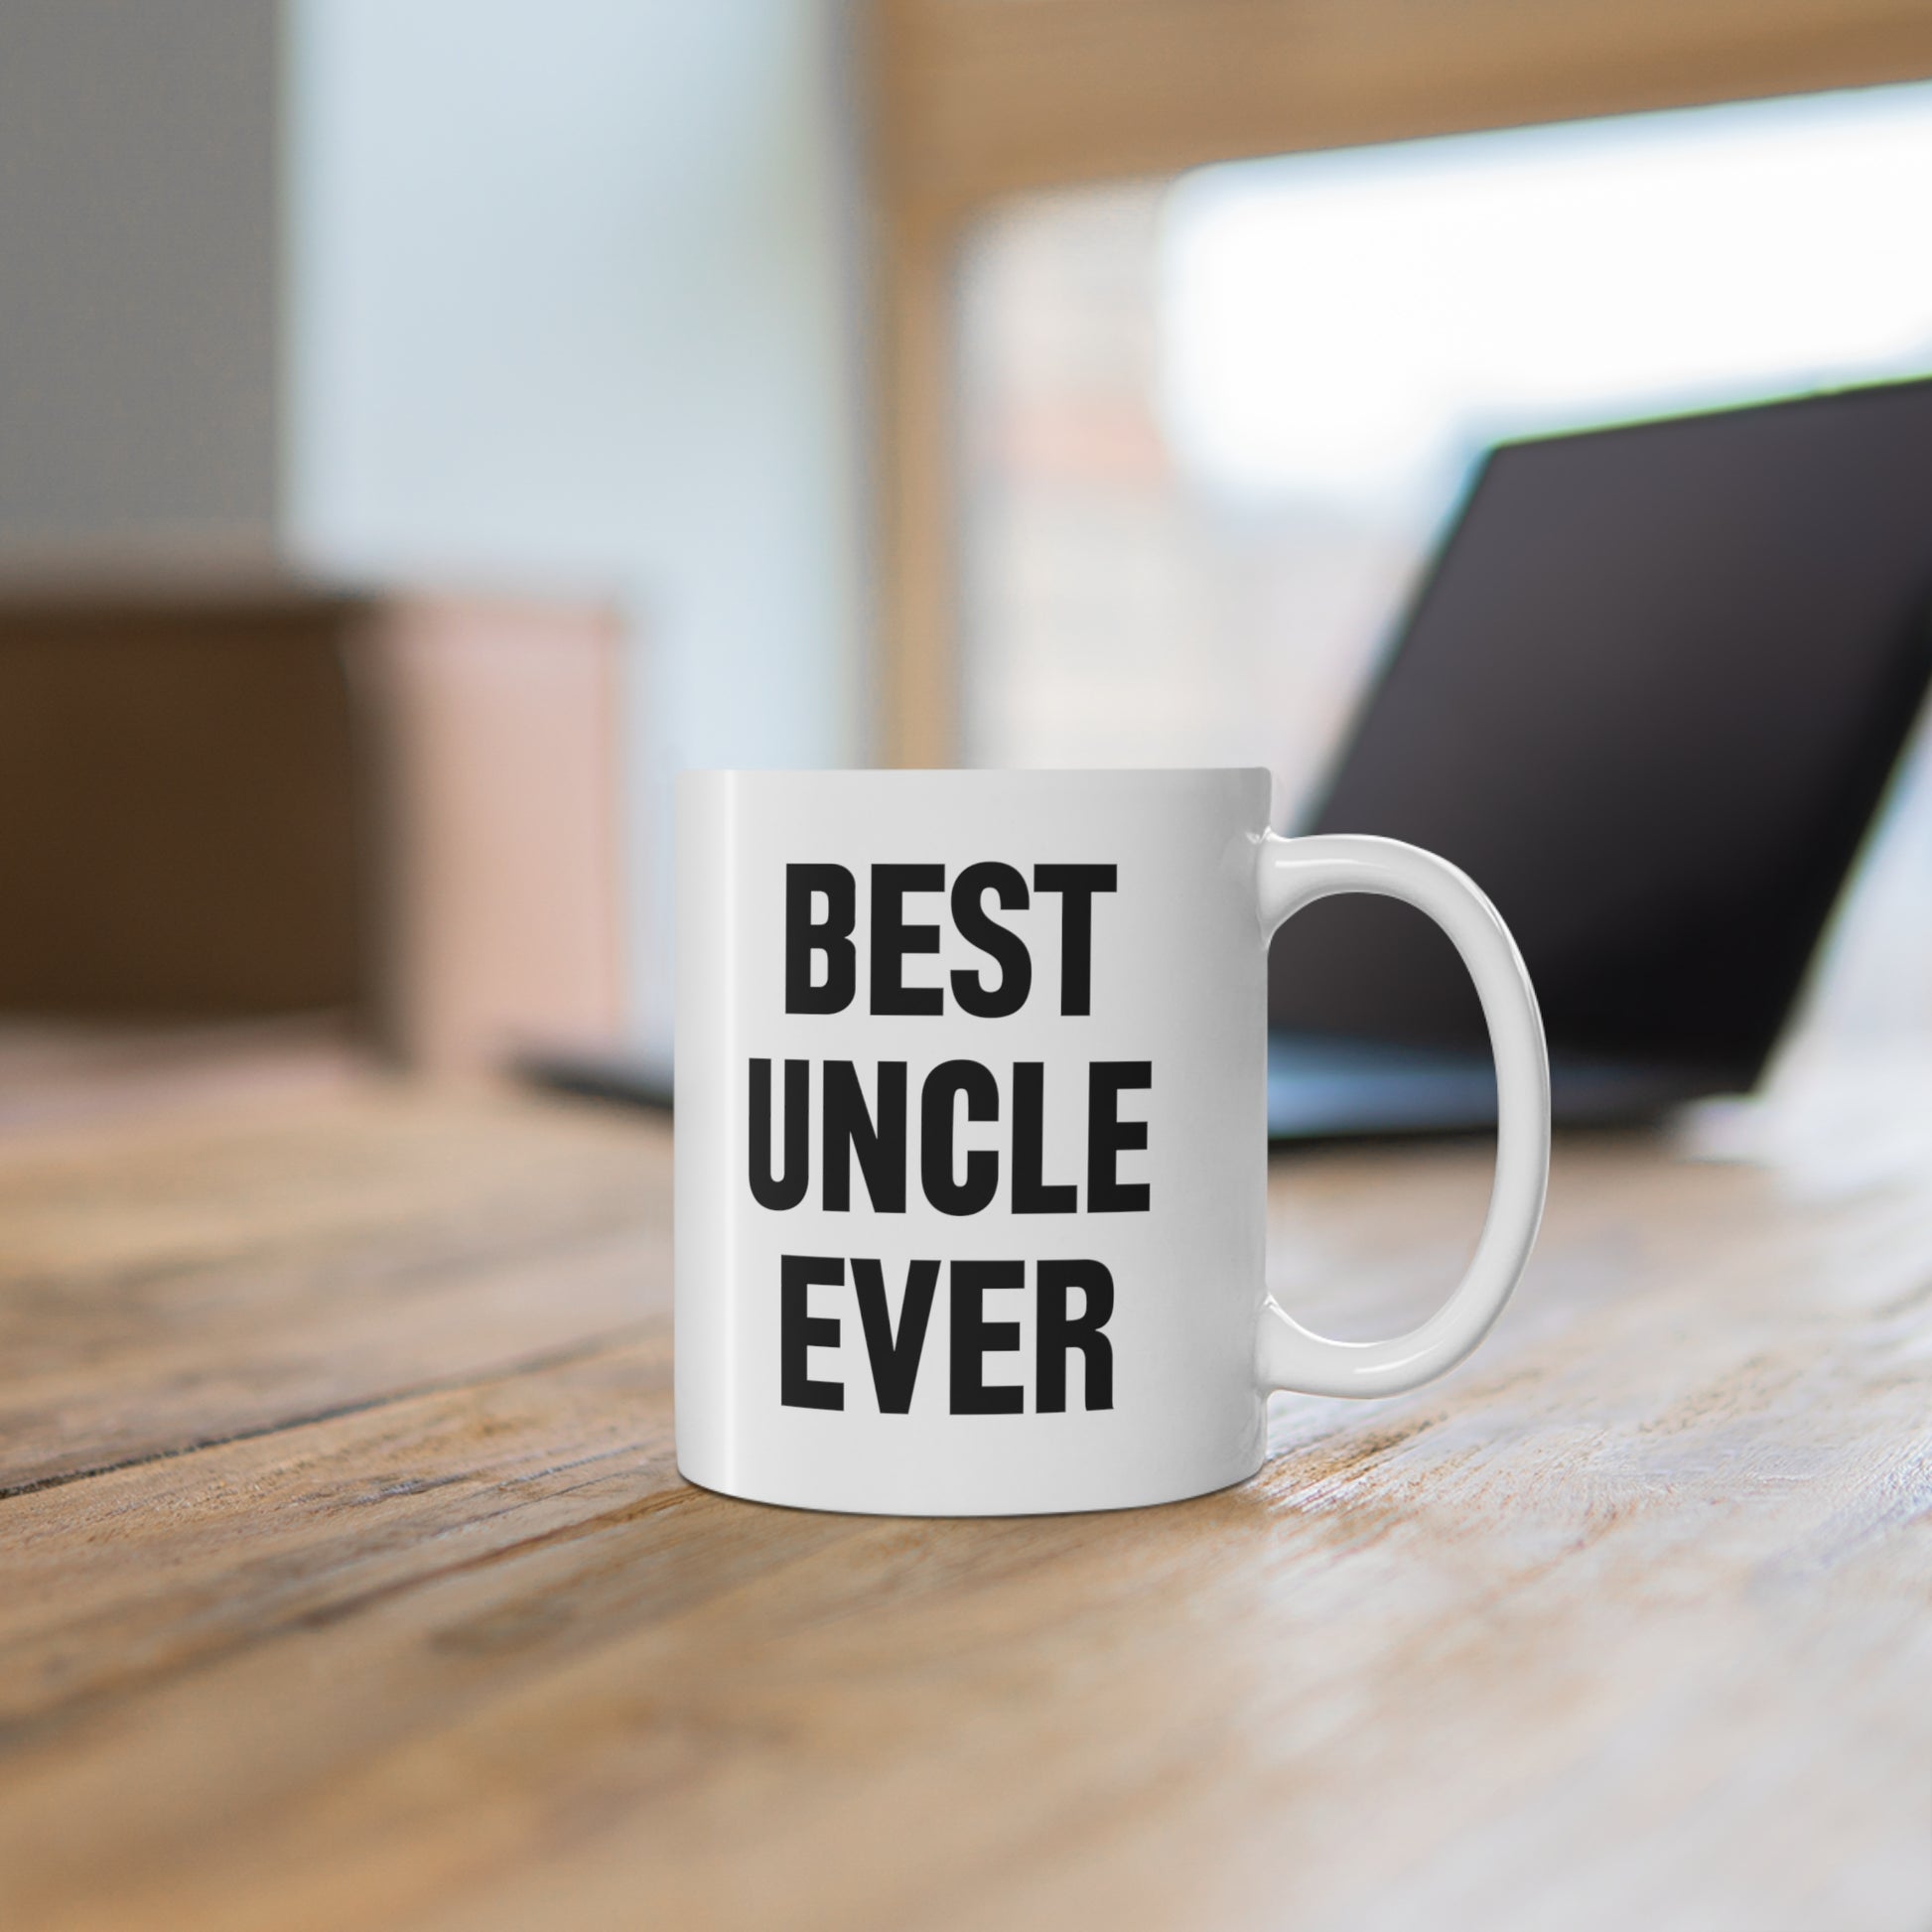 ceramic mug with quote Best Uncle Ever